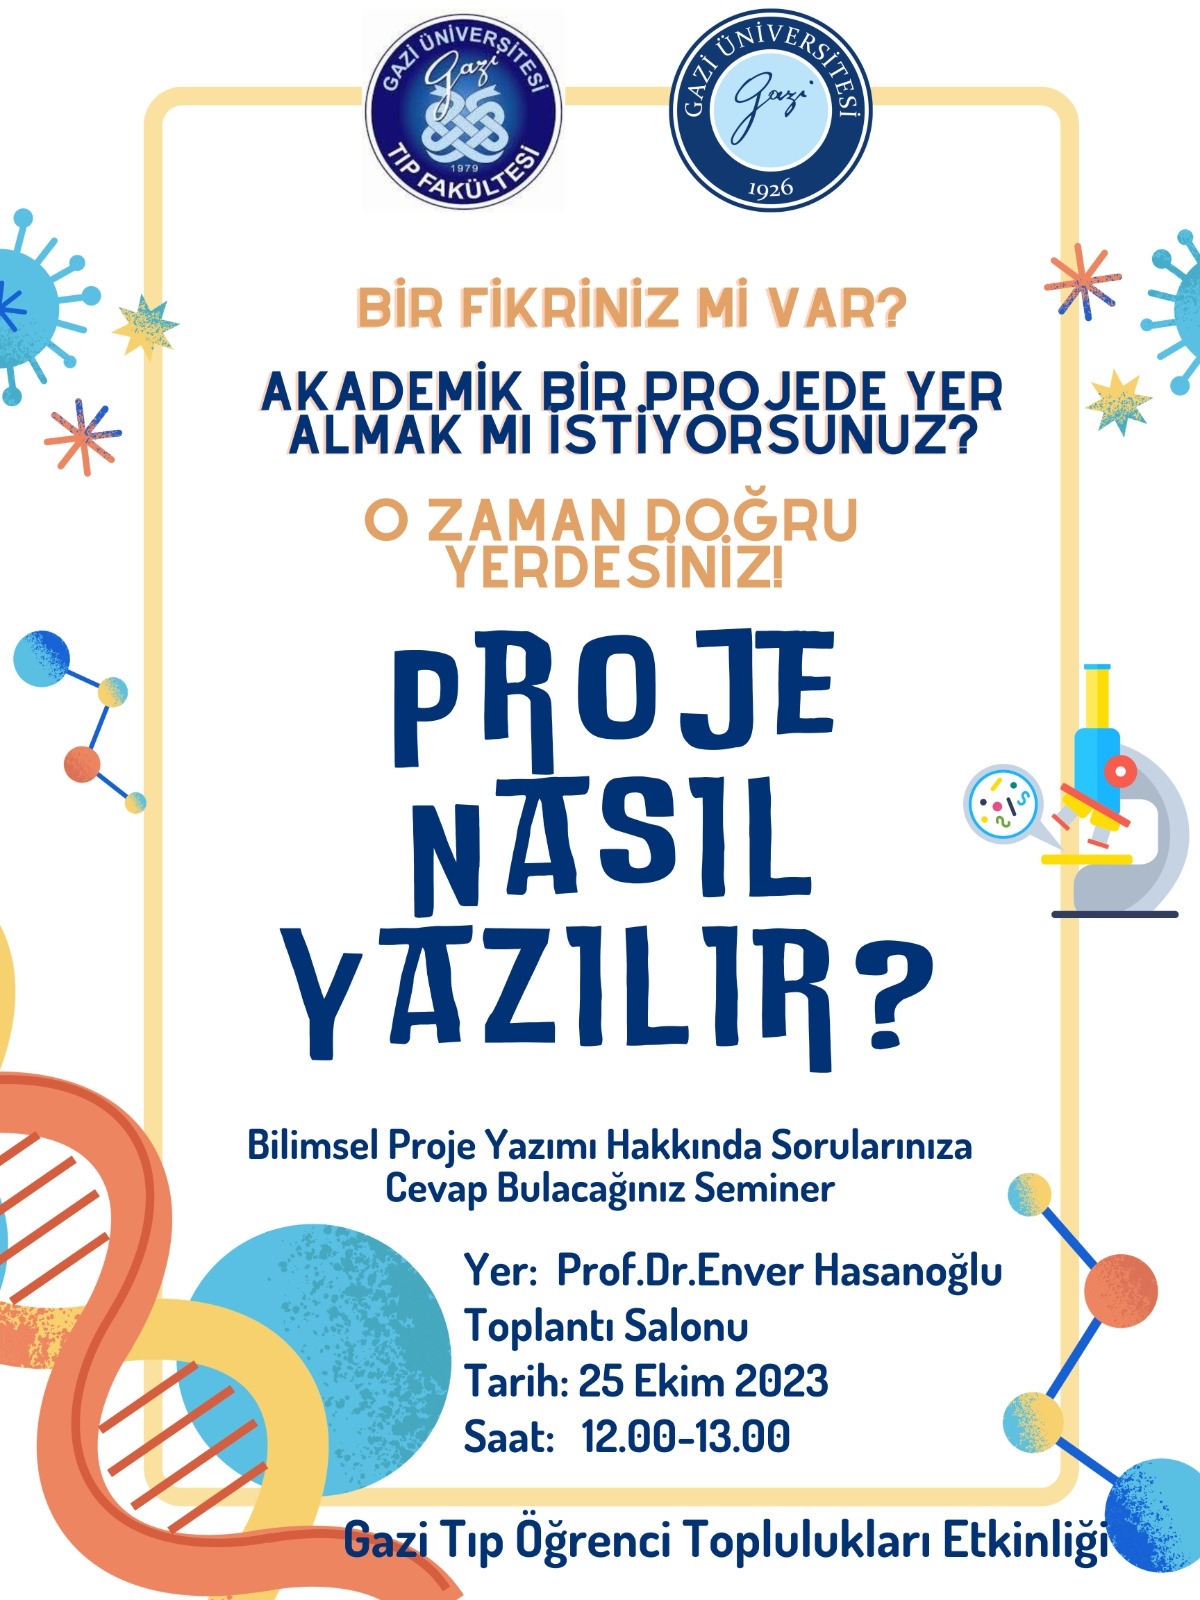 ✨ Hello Gazi University Faculty of Medicine Students!✨ We are offering you an exciting opportunity! 🎉🎉